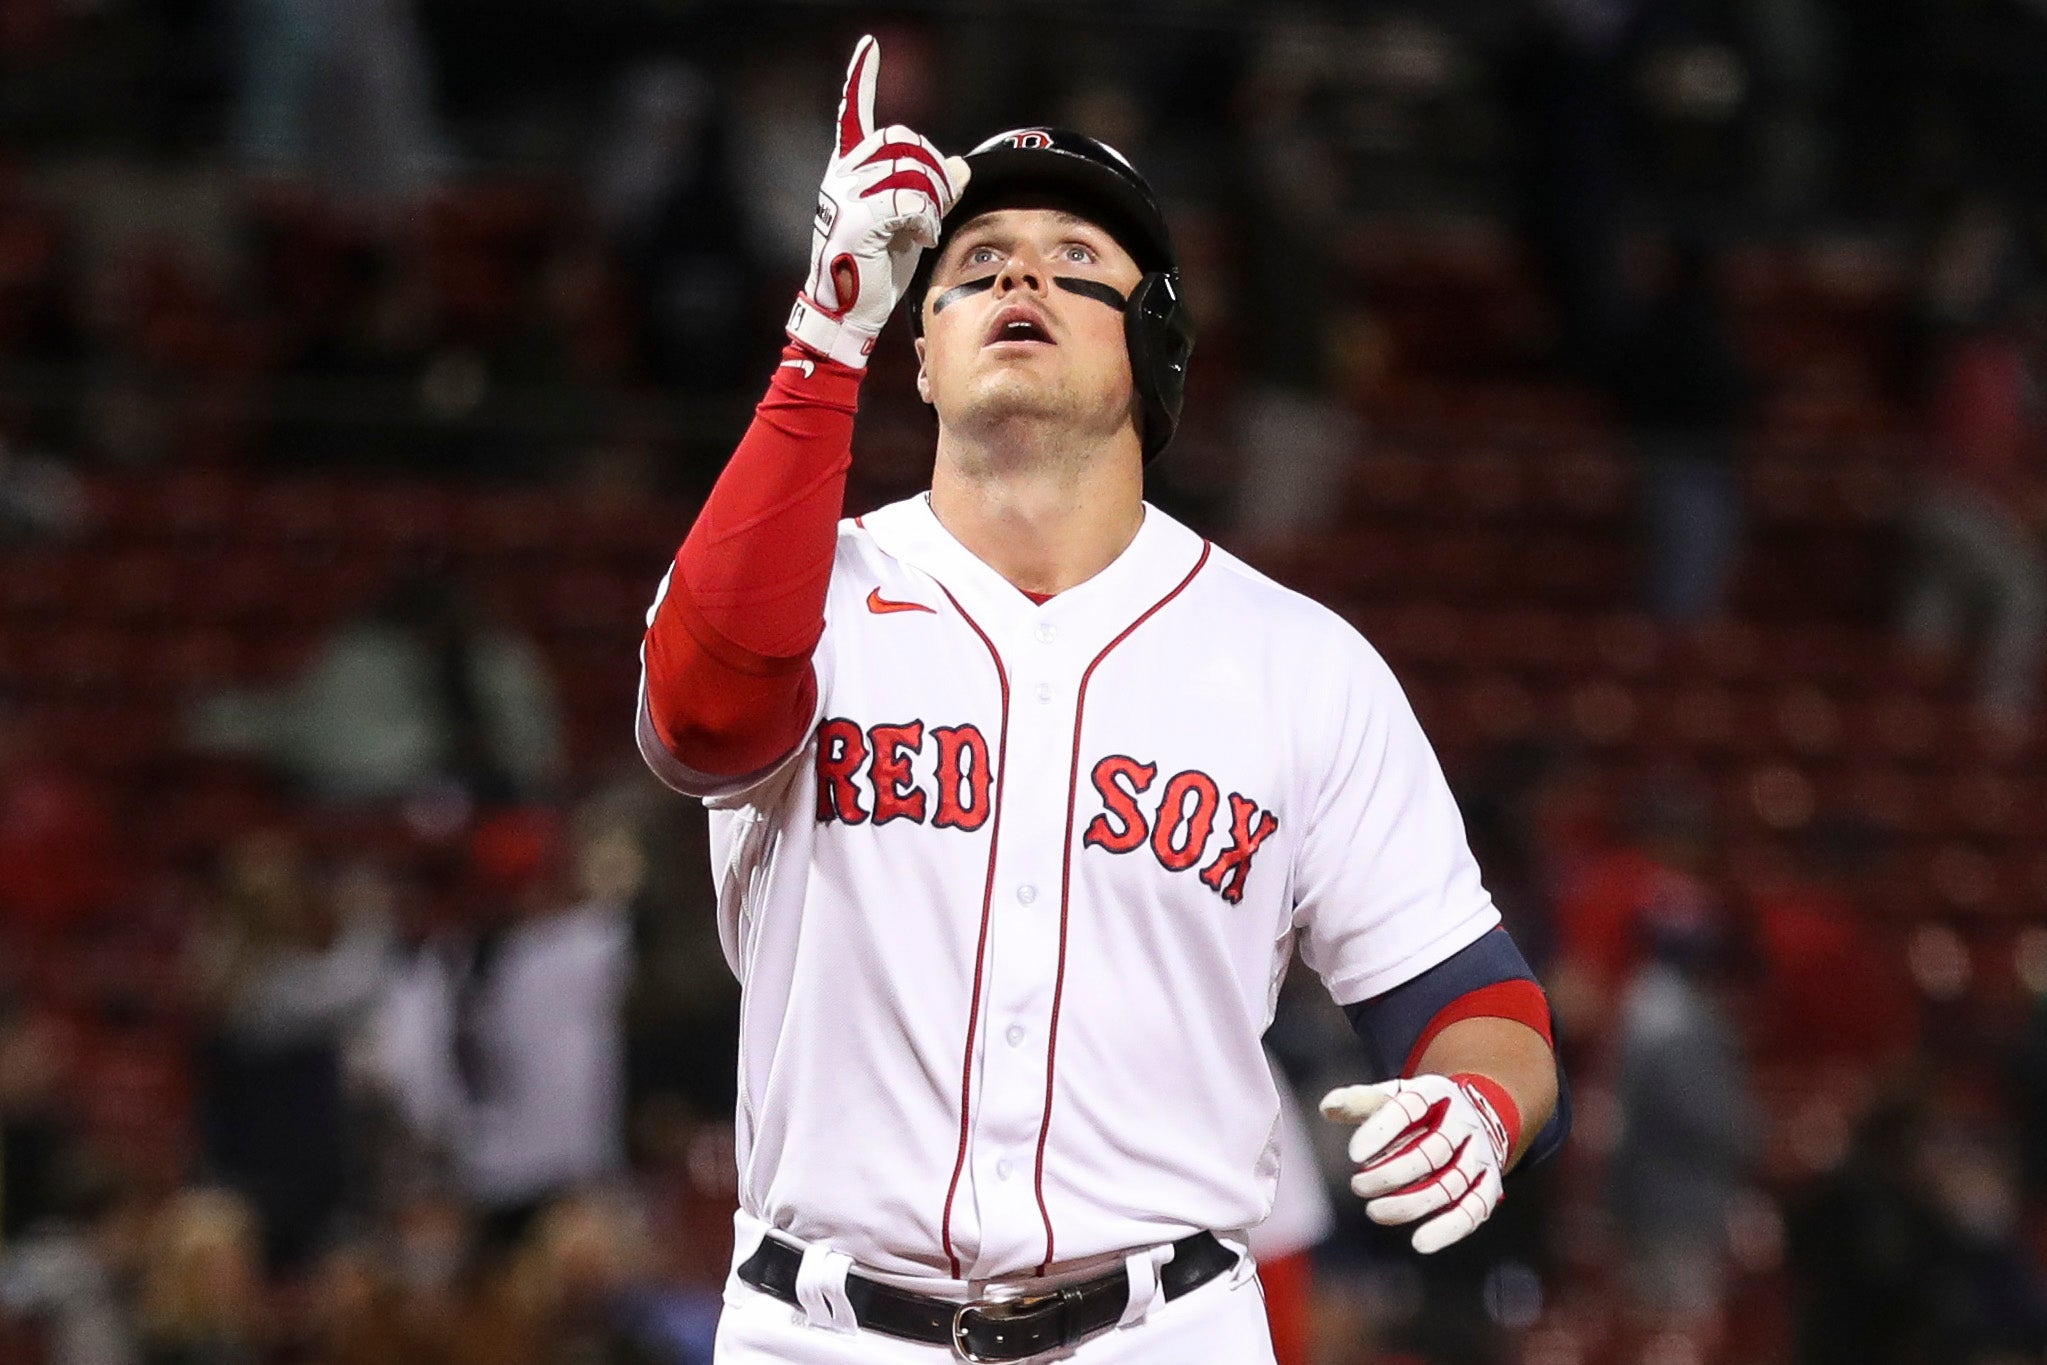 Boston Red Sox Tampa Bay Rays: Hunter Renfroe plays hero - Over